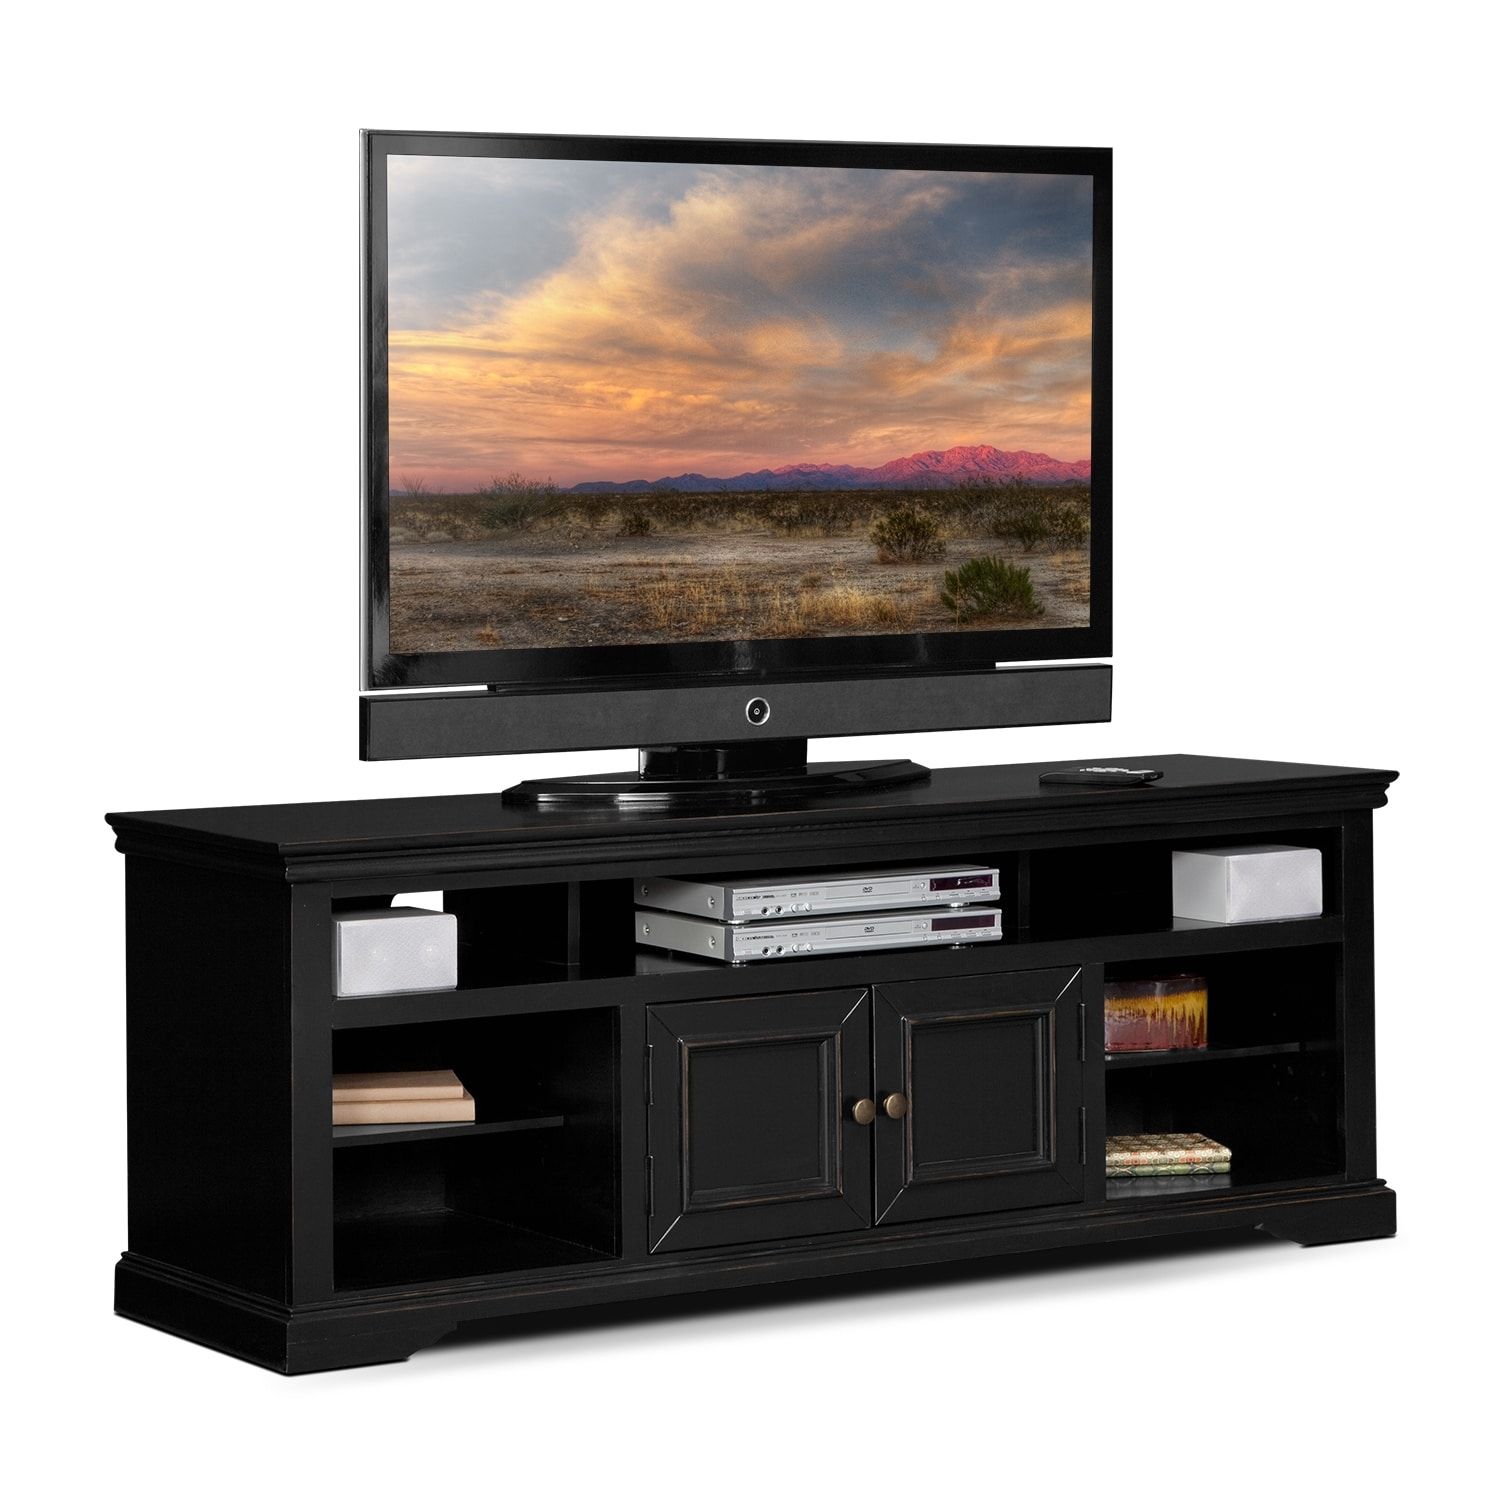 Jenson 70" Tv Stand – Black | Value City Furniture And For Huntington Tv Stands For Tvs Up To 70" (View 8 of 15)